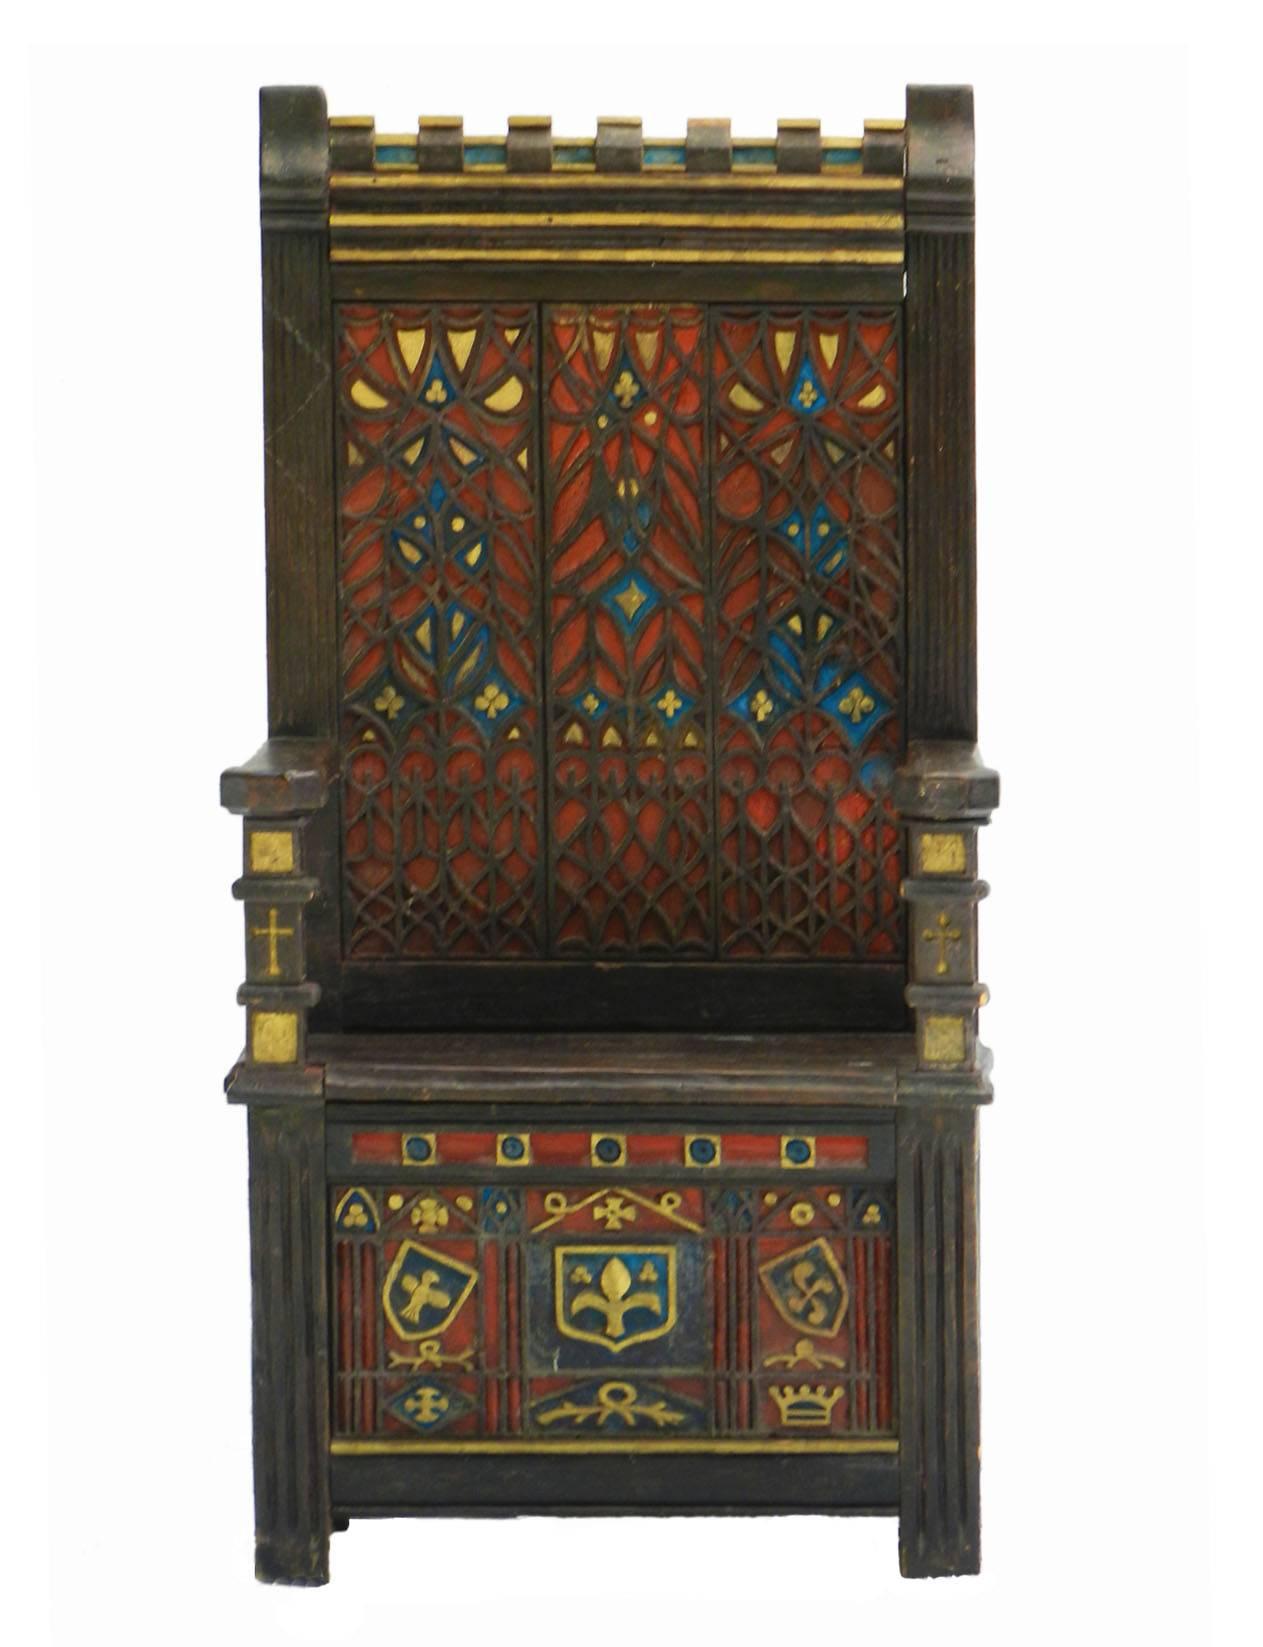 Arts and Crafts monks bench throne chair, circa 1910-1920
All original
Stunning character feature chair 
Carved oak Gothic Revival
French Folk Art
With Basque Celtic crosses
Polychrome ottoman 
Seat rises for storage
Hall chair
From a small French